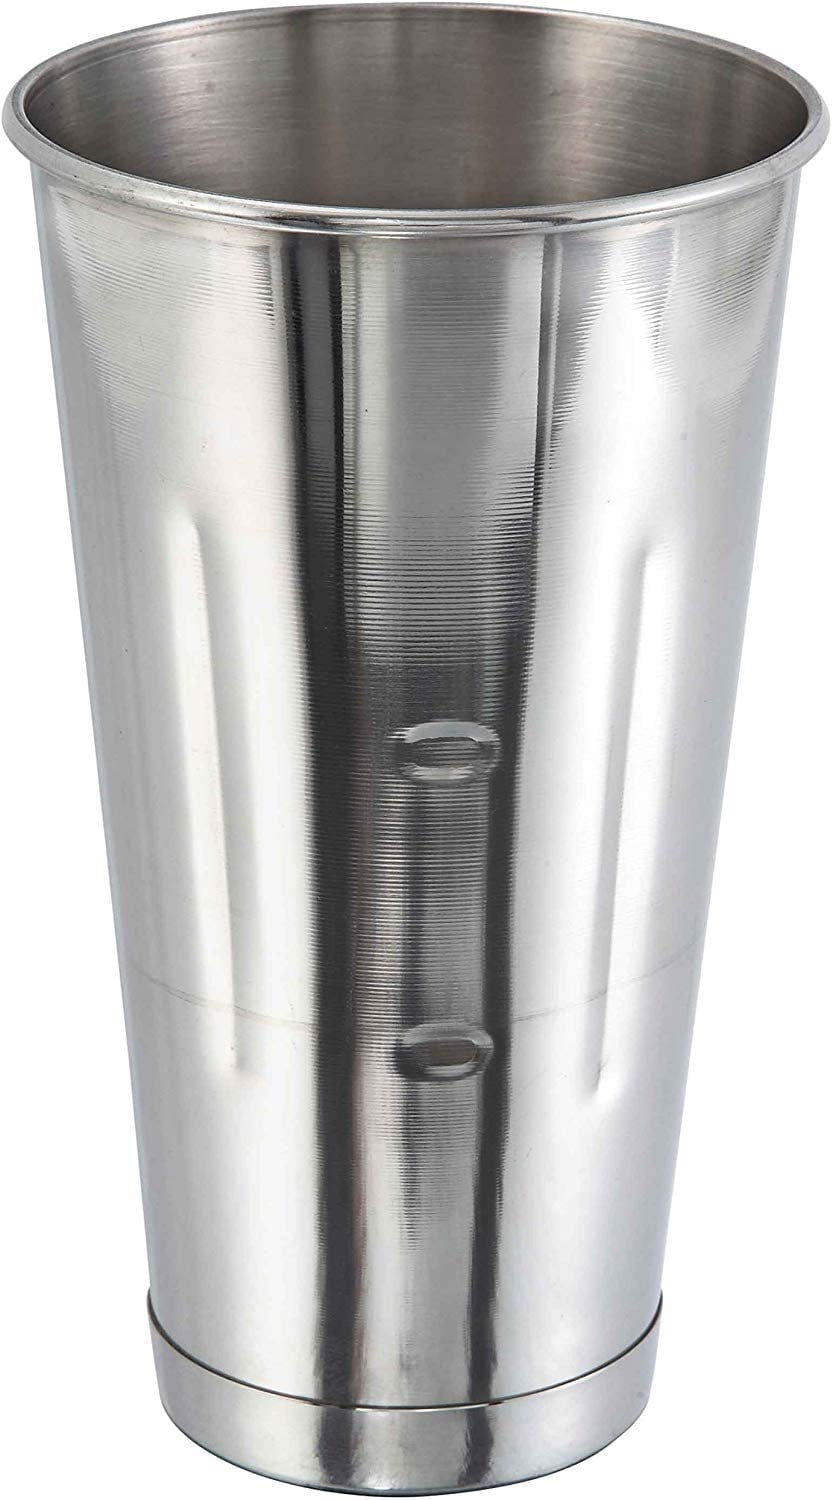 (Set of 2) 30 oz Stainless Steel Malt Cups by Tezzorio, Professional Blender Cups, Milkshake Cups, Cocktail Mixing Cups